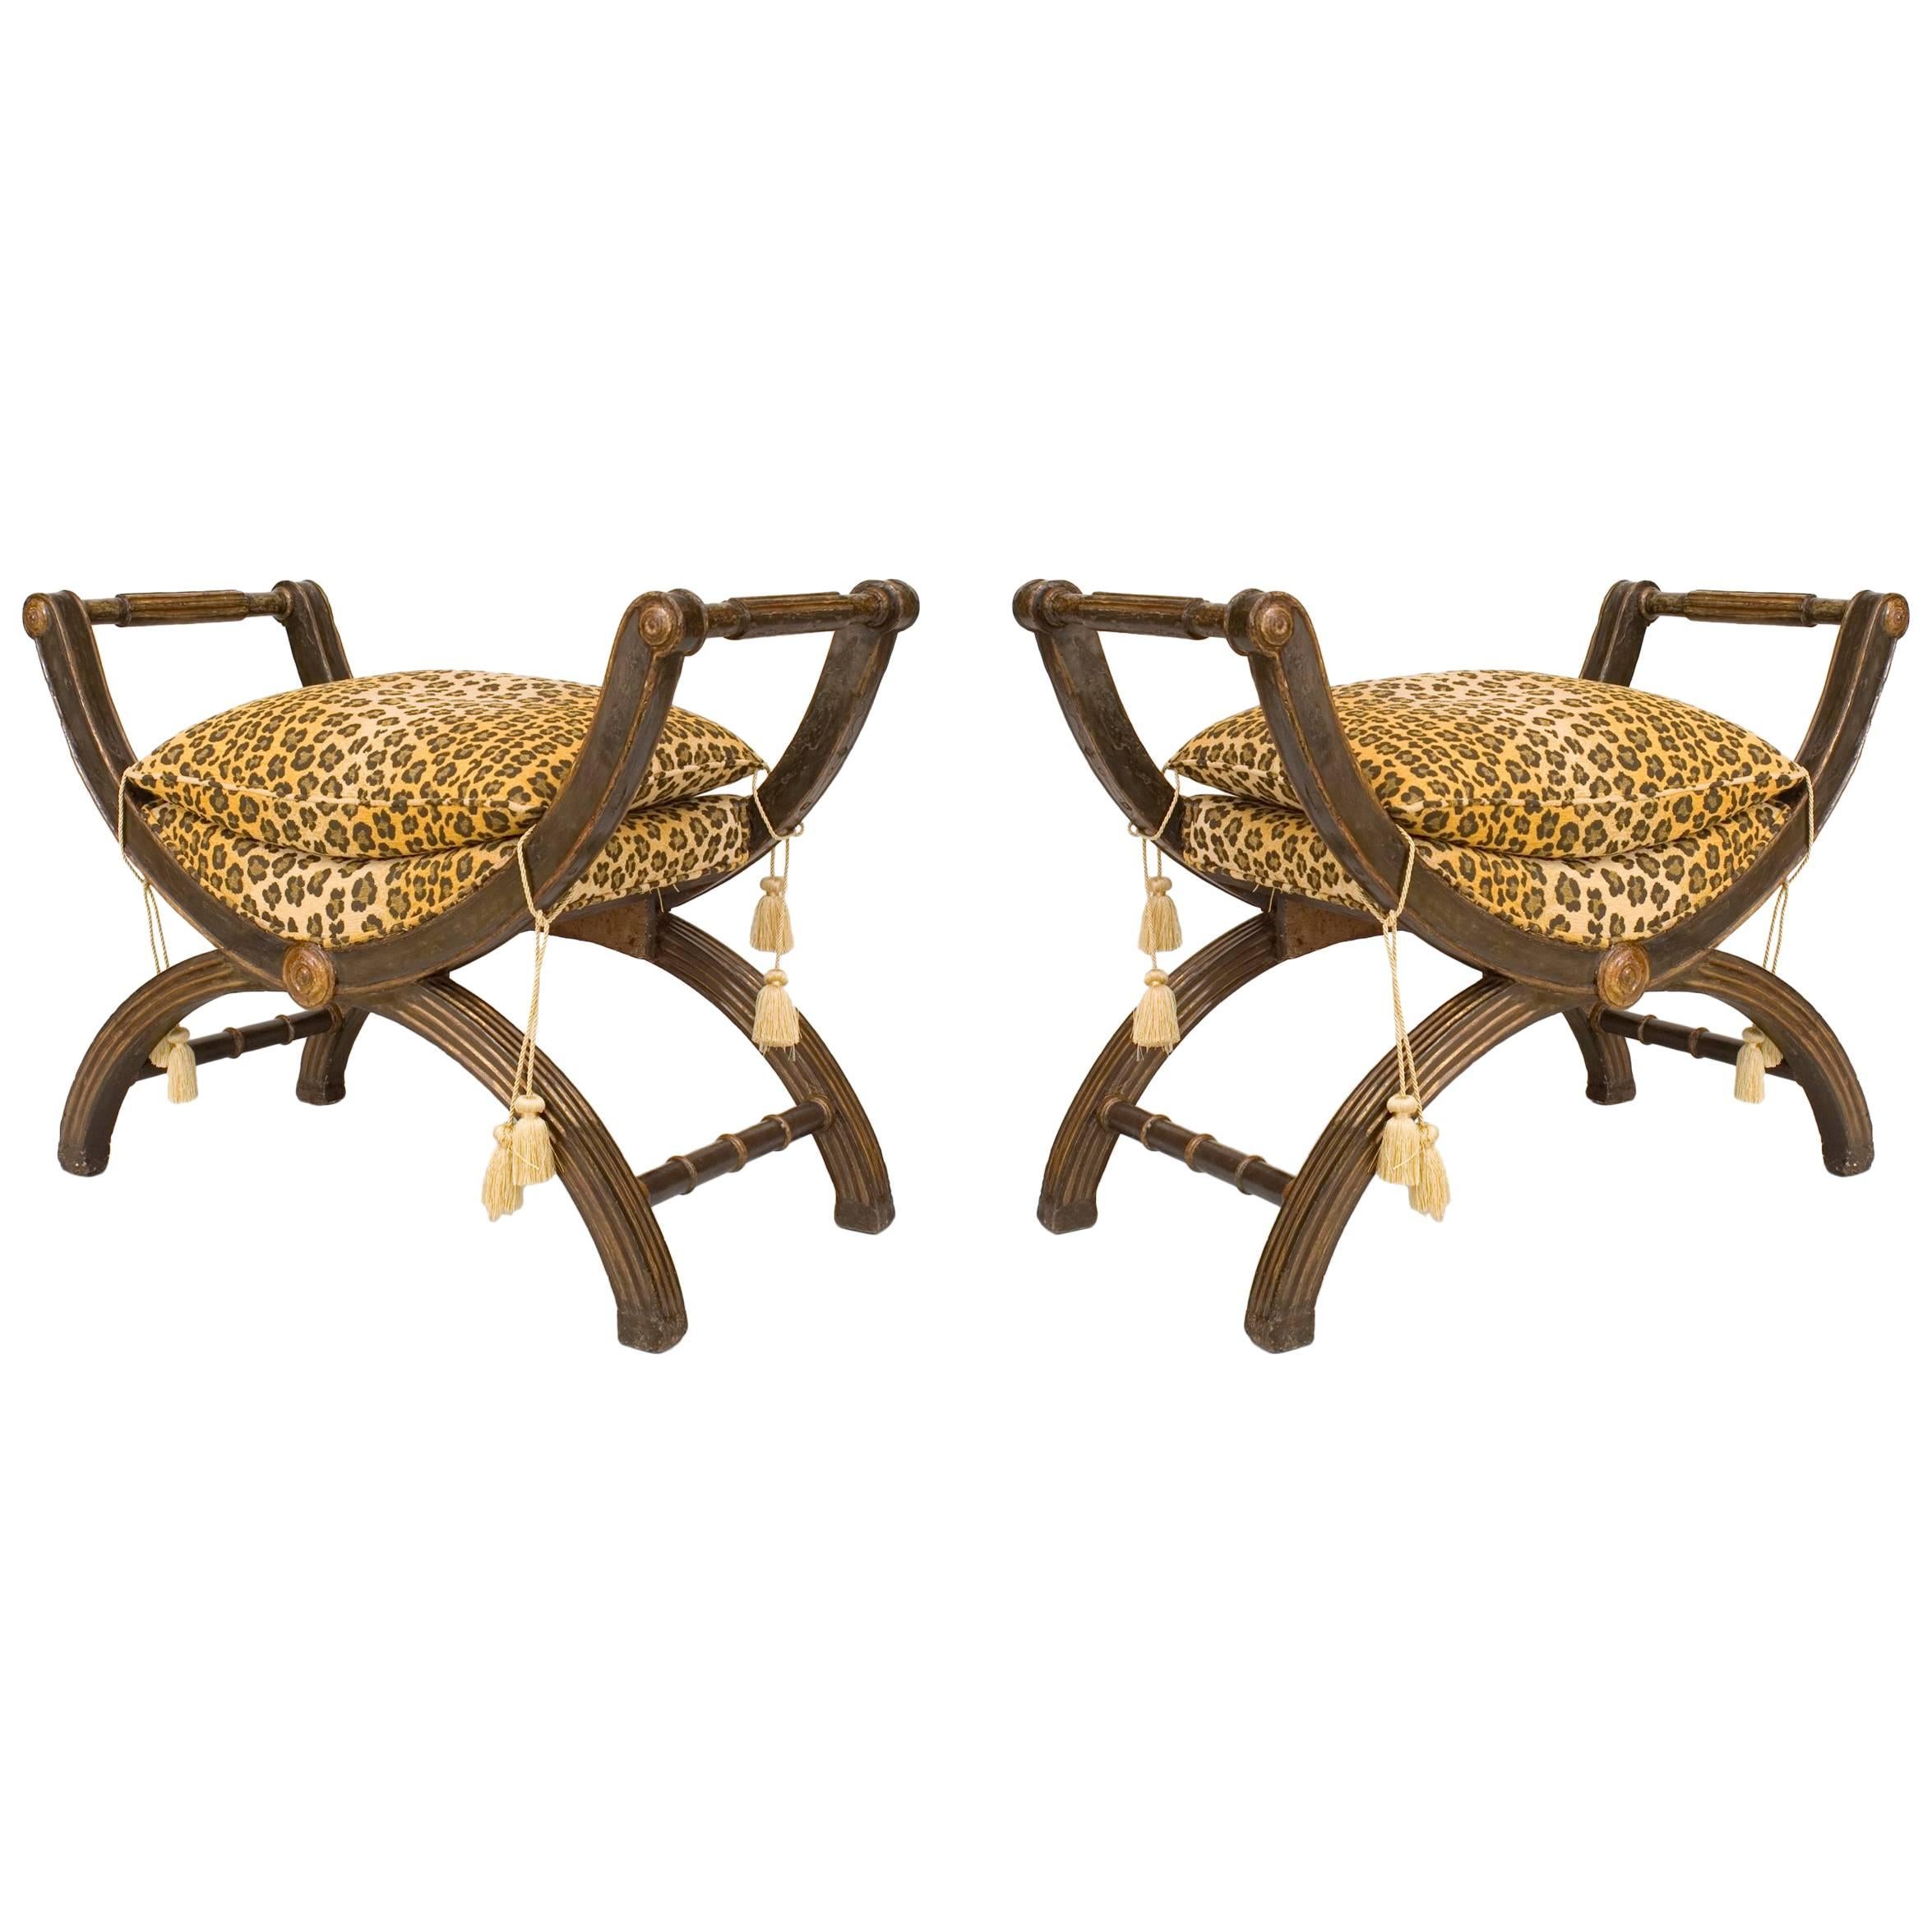 Pair of Italian Neo-Classic Faux Leopard Benches